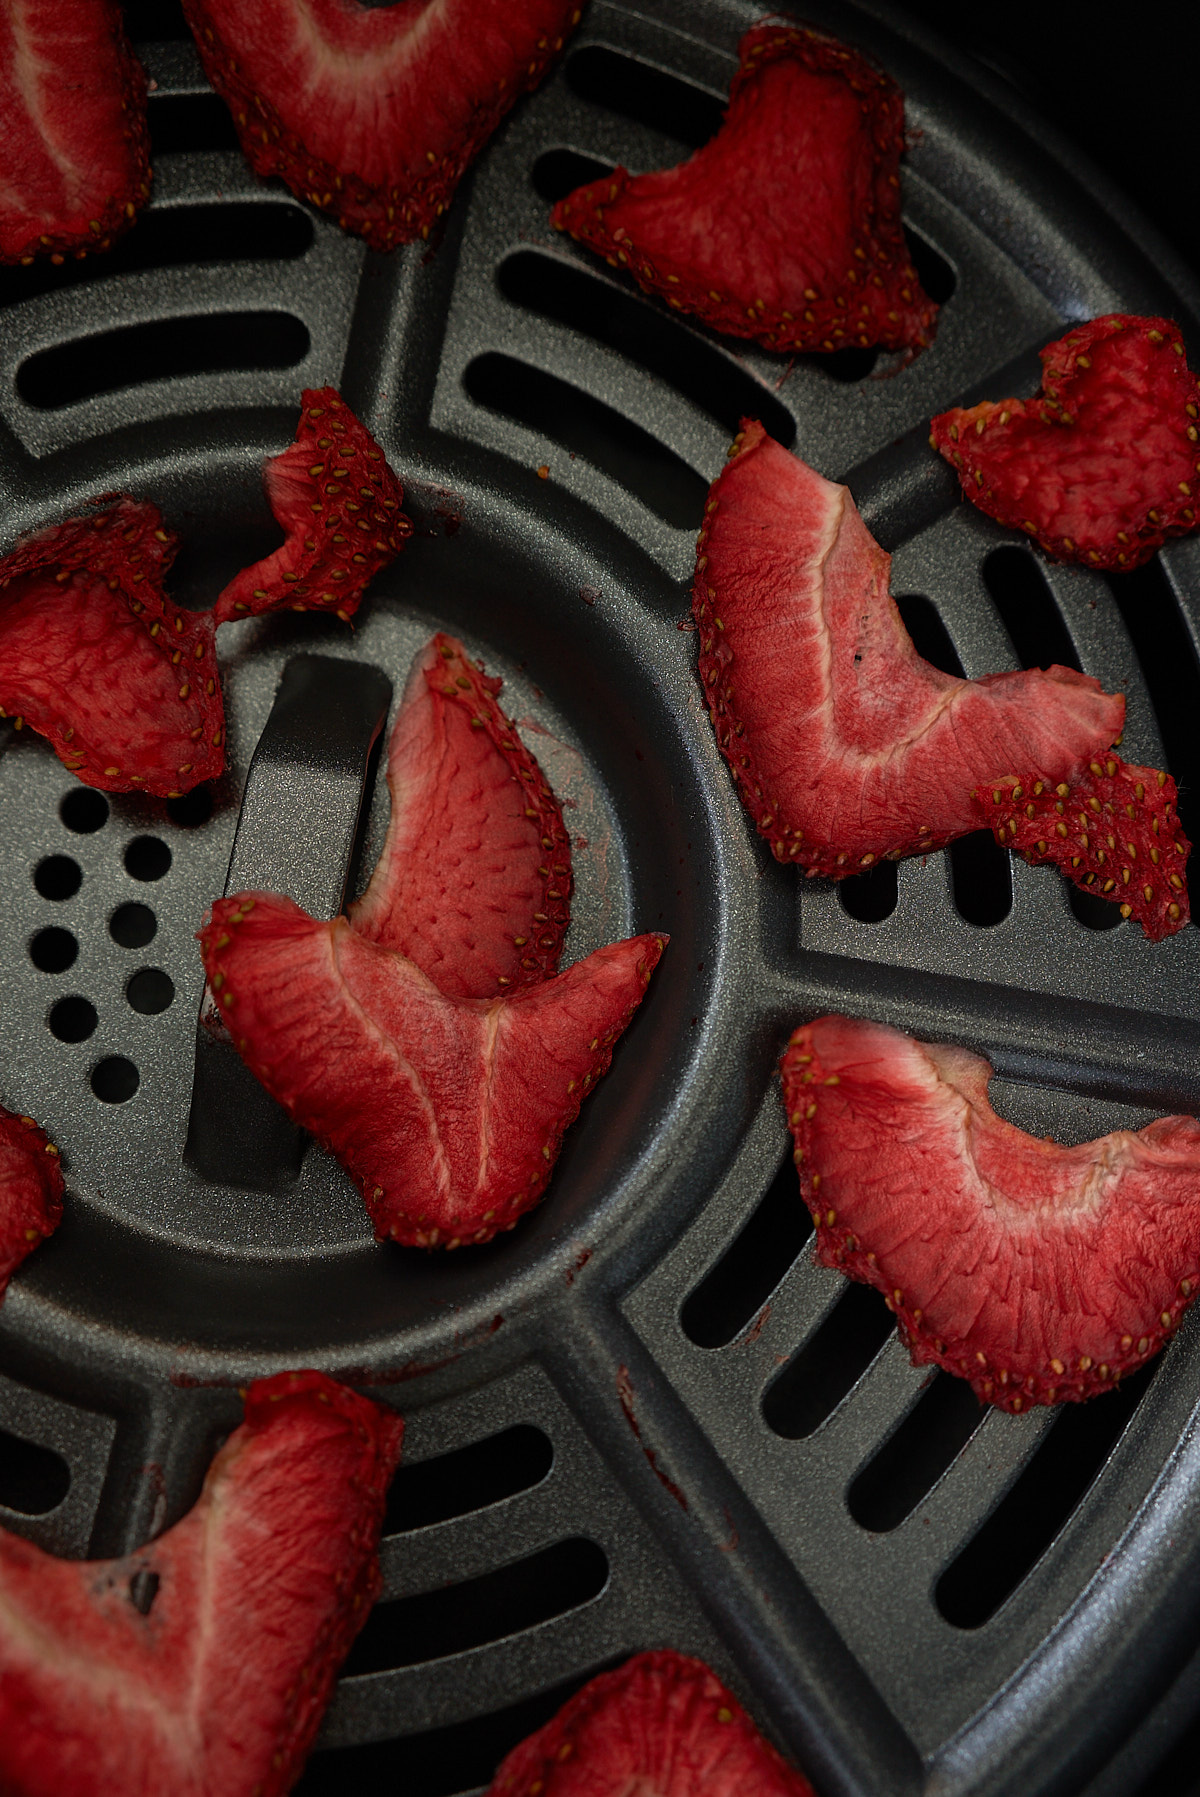 strawberries after dehydrating in air fryer basket